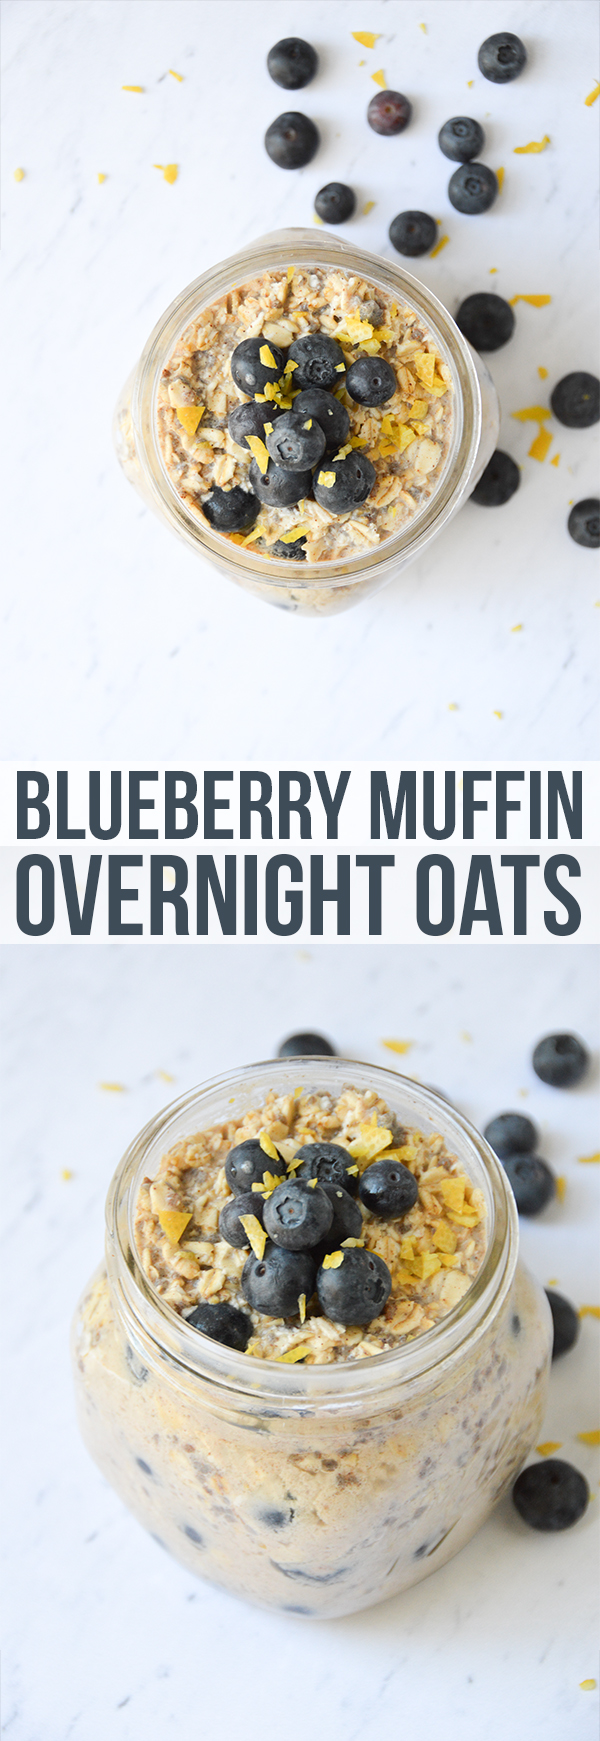 Blueberry Muffin Overnight Oats | Prepare these blueberry muffin overnight oats in a few minutes the night before (under 10 ingredients!) so you have a delicious breakfast ready to go in the morning. #overnightoats #blueberry #breakfast #oats #overnightoatsrecipe